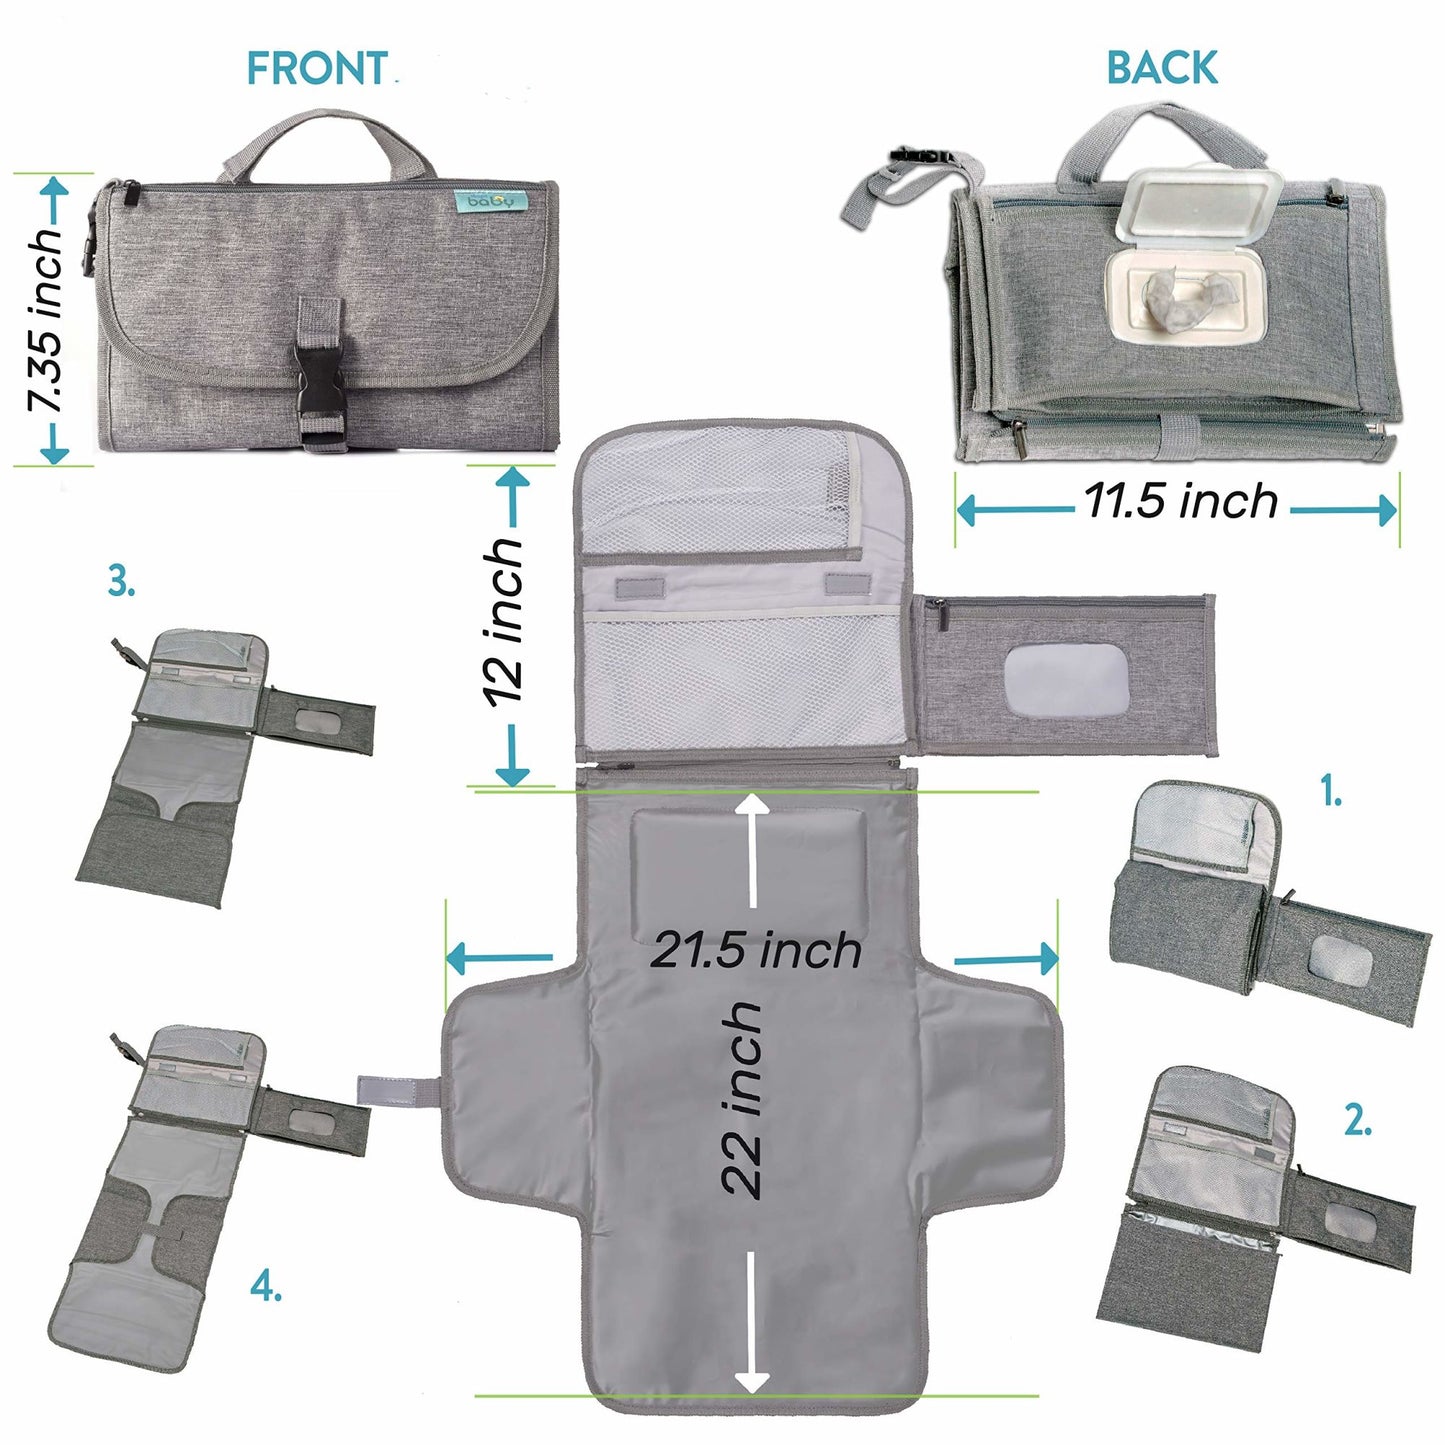 Best Selling Portable Diaper Changing Pad For Newborn Baby Diaper Changing Pad With Smart Wipe Pouch - Waterproof Travel Changing Kit